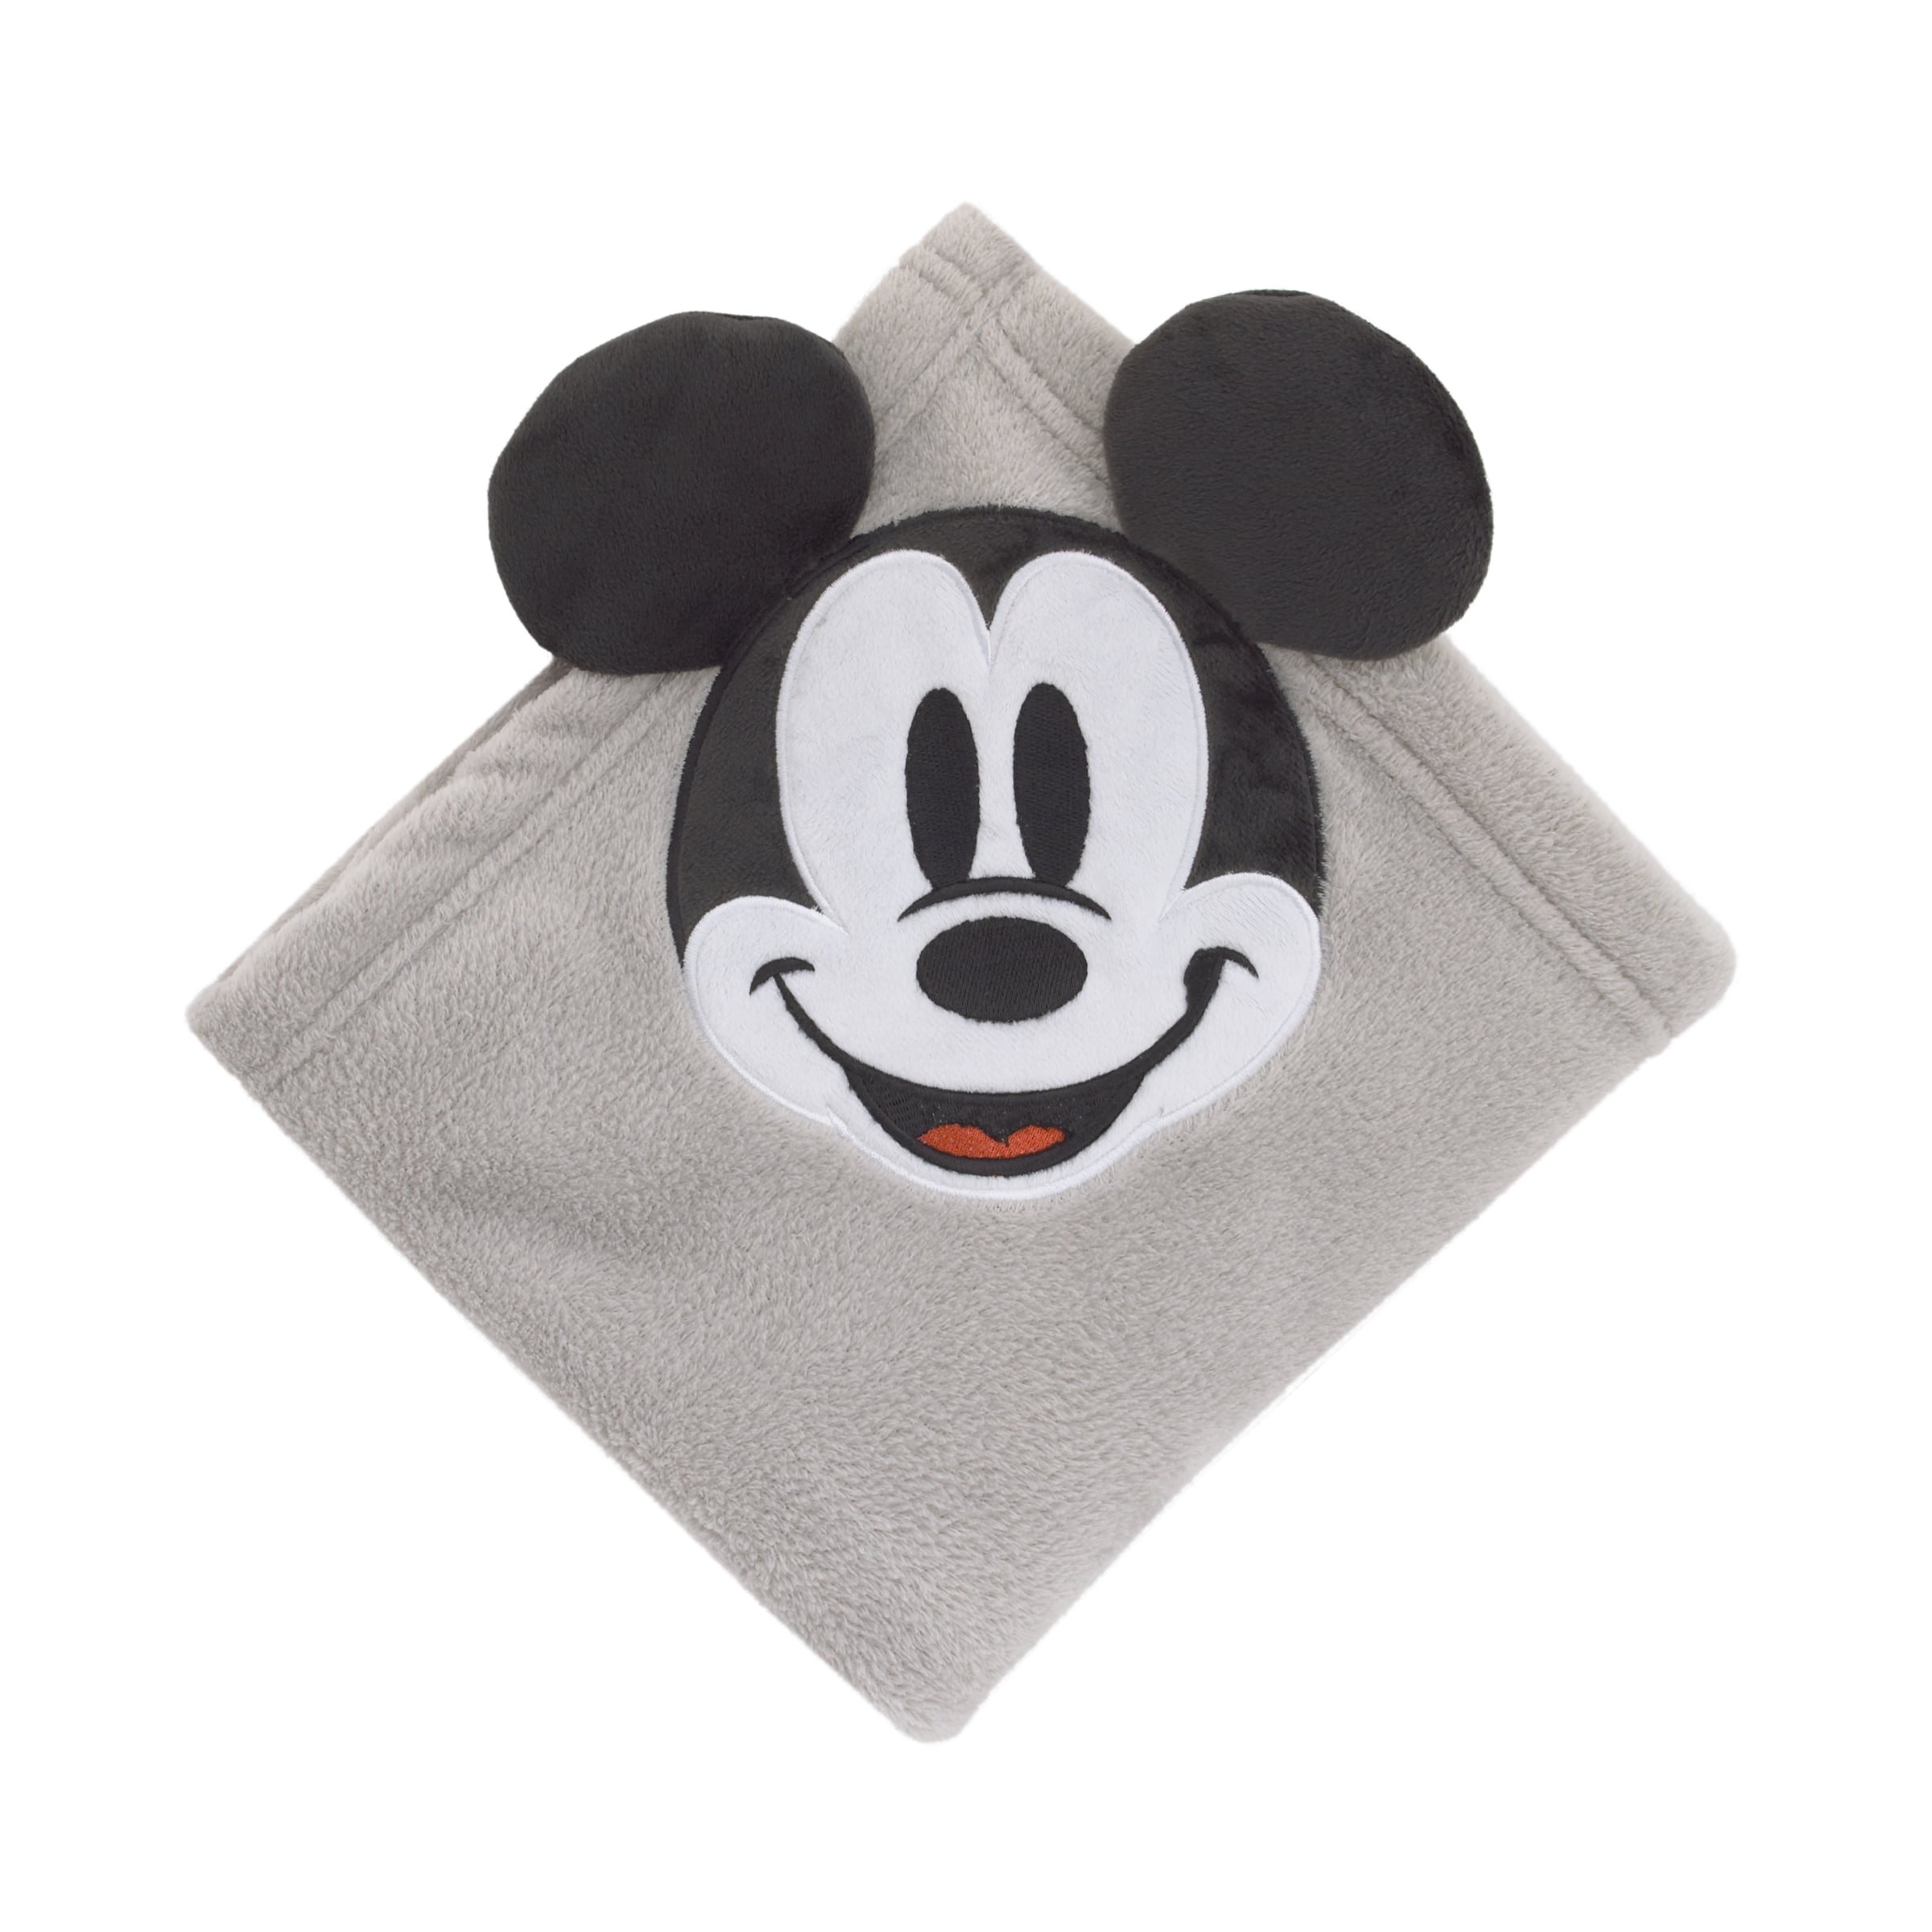 Disney Mickey Mouse Super Soft Corner Applique Baby Blanket With 3D Ears